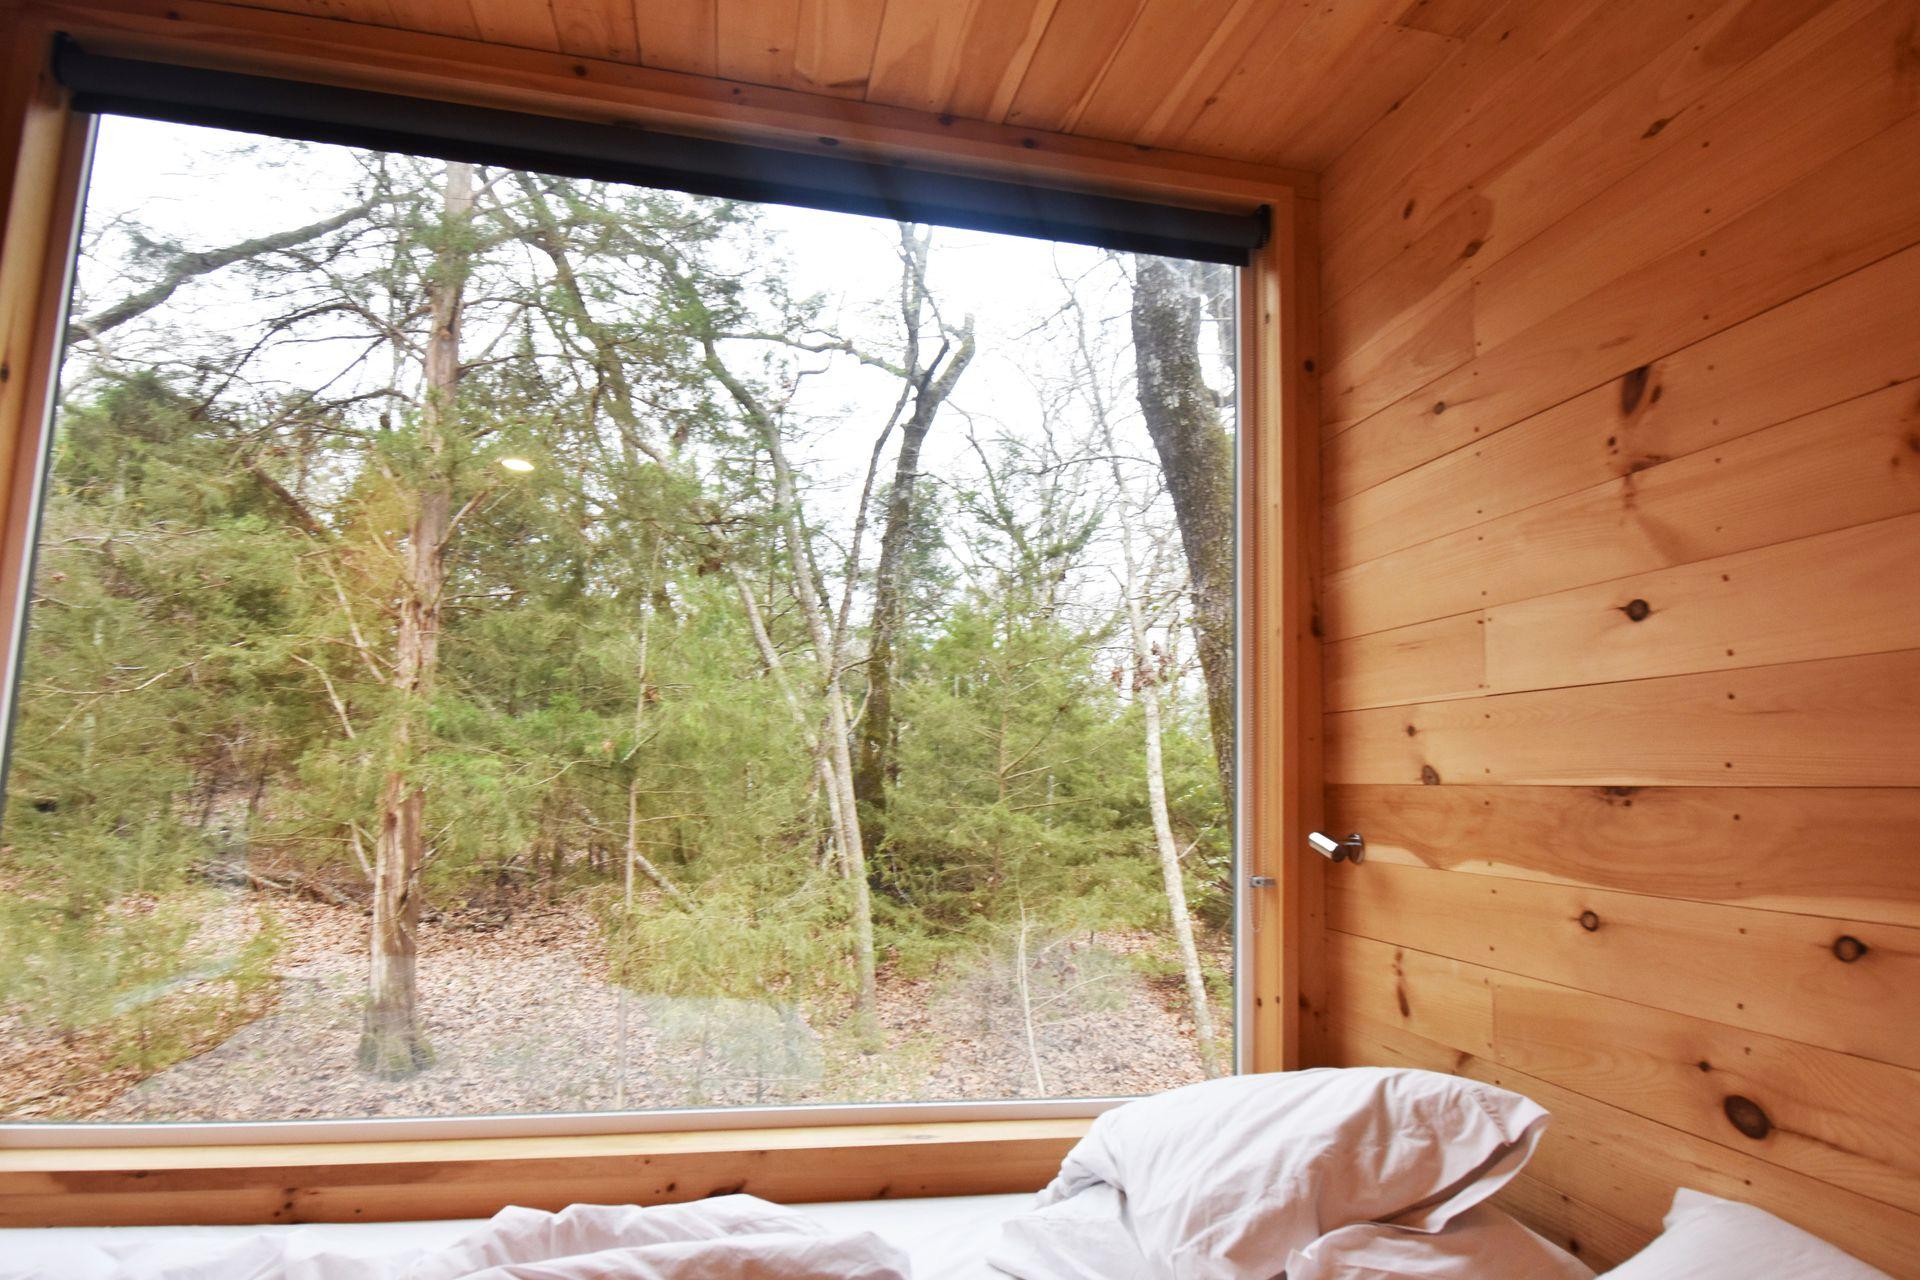 Looking out the window at the Getaway Cabin outside of Dallas.